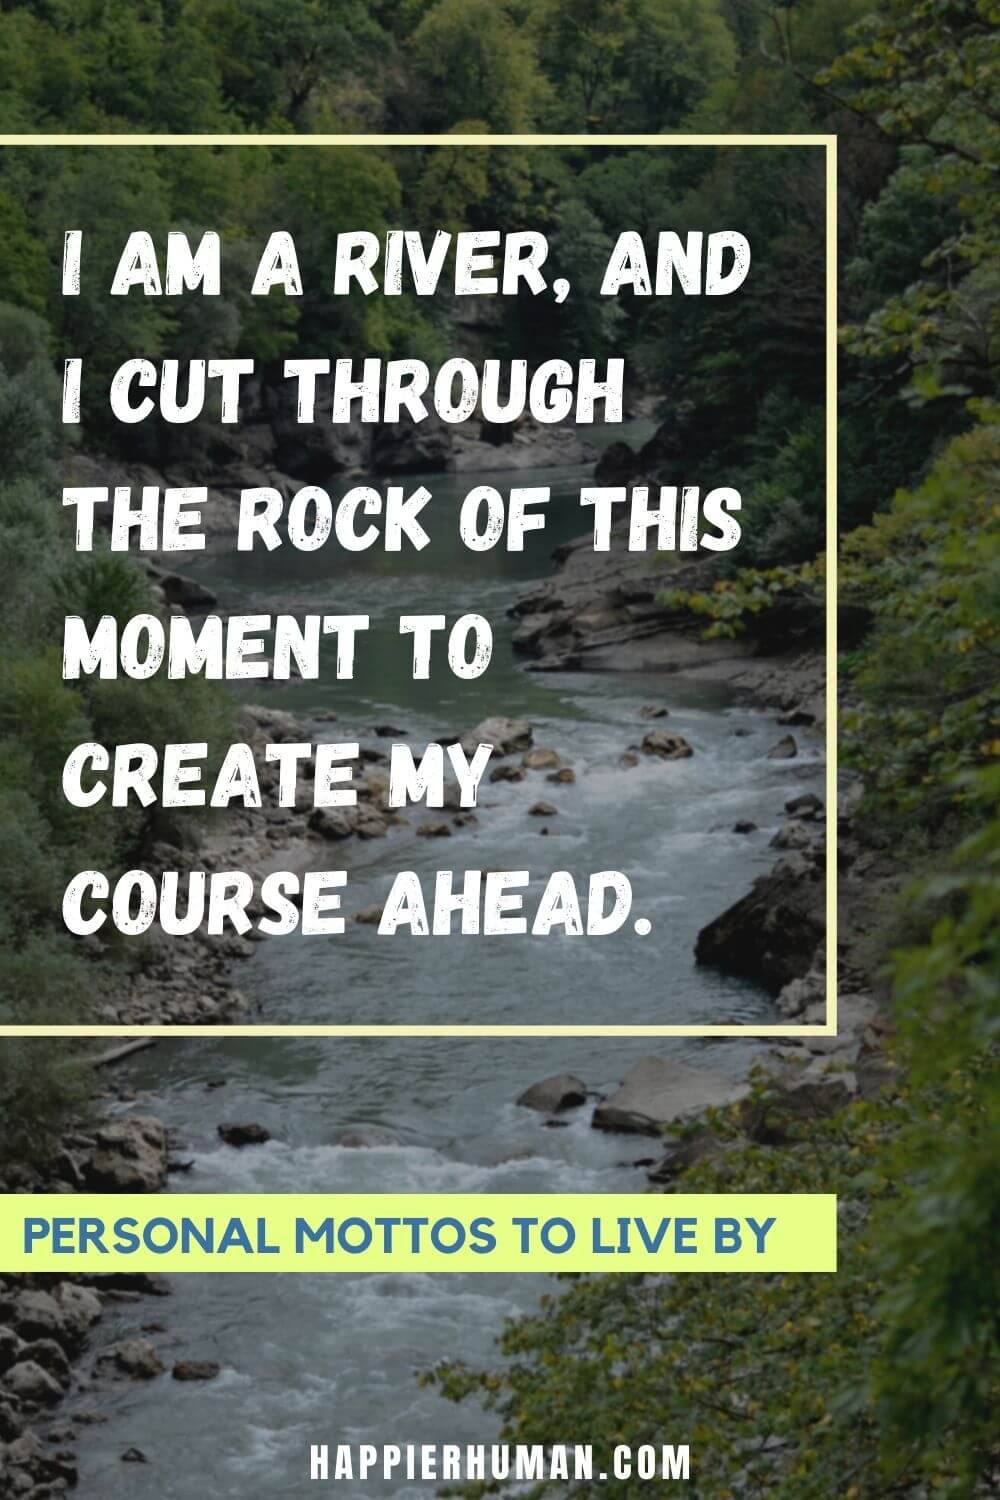 Personal Motto - I am a river, and I cut through the rock of this moment to create my course ahead. | short motto in life | personal motto generator | famous mottos in life